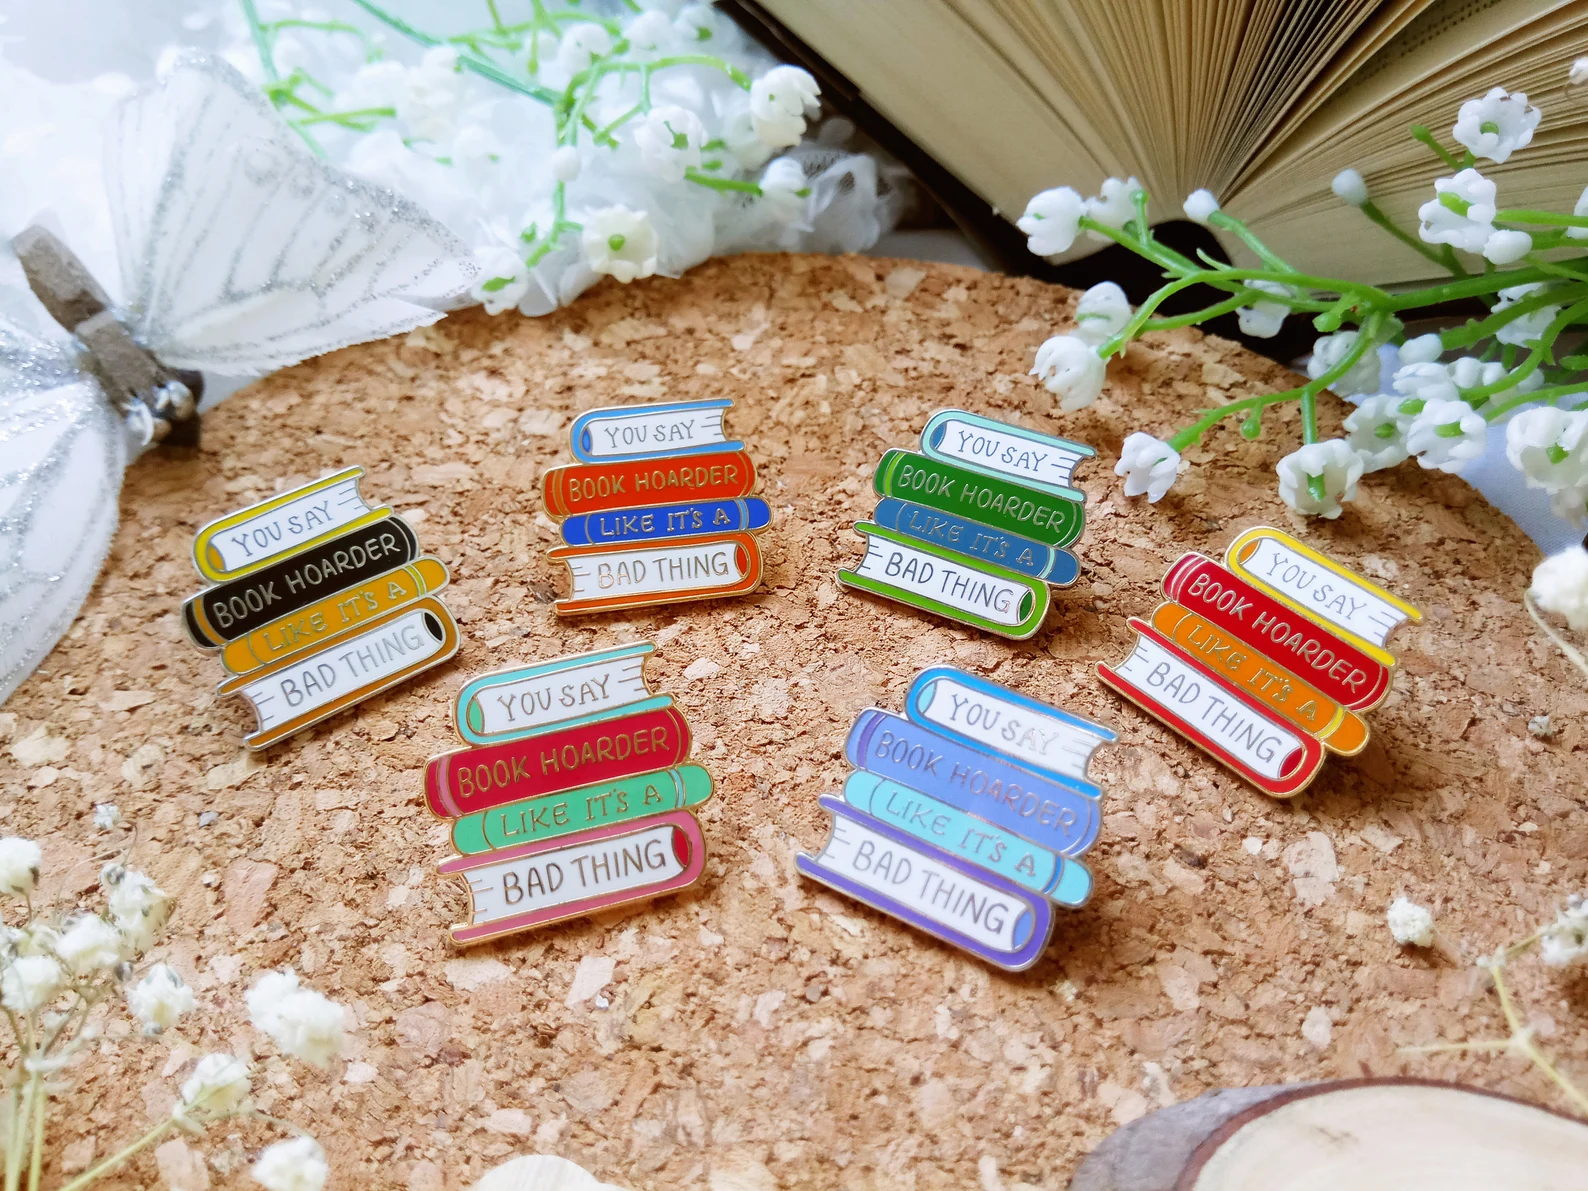 Enamel pins depicting stacks of books with the words "You say book boarding like it's a bad thing"